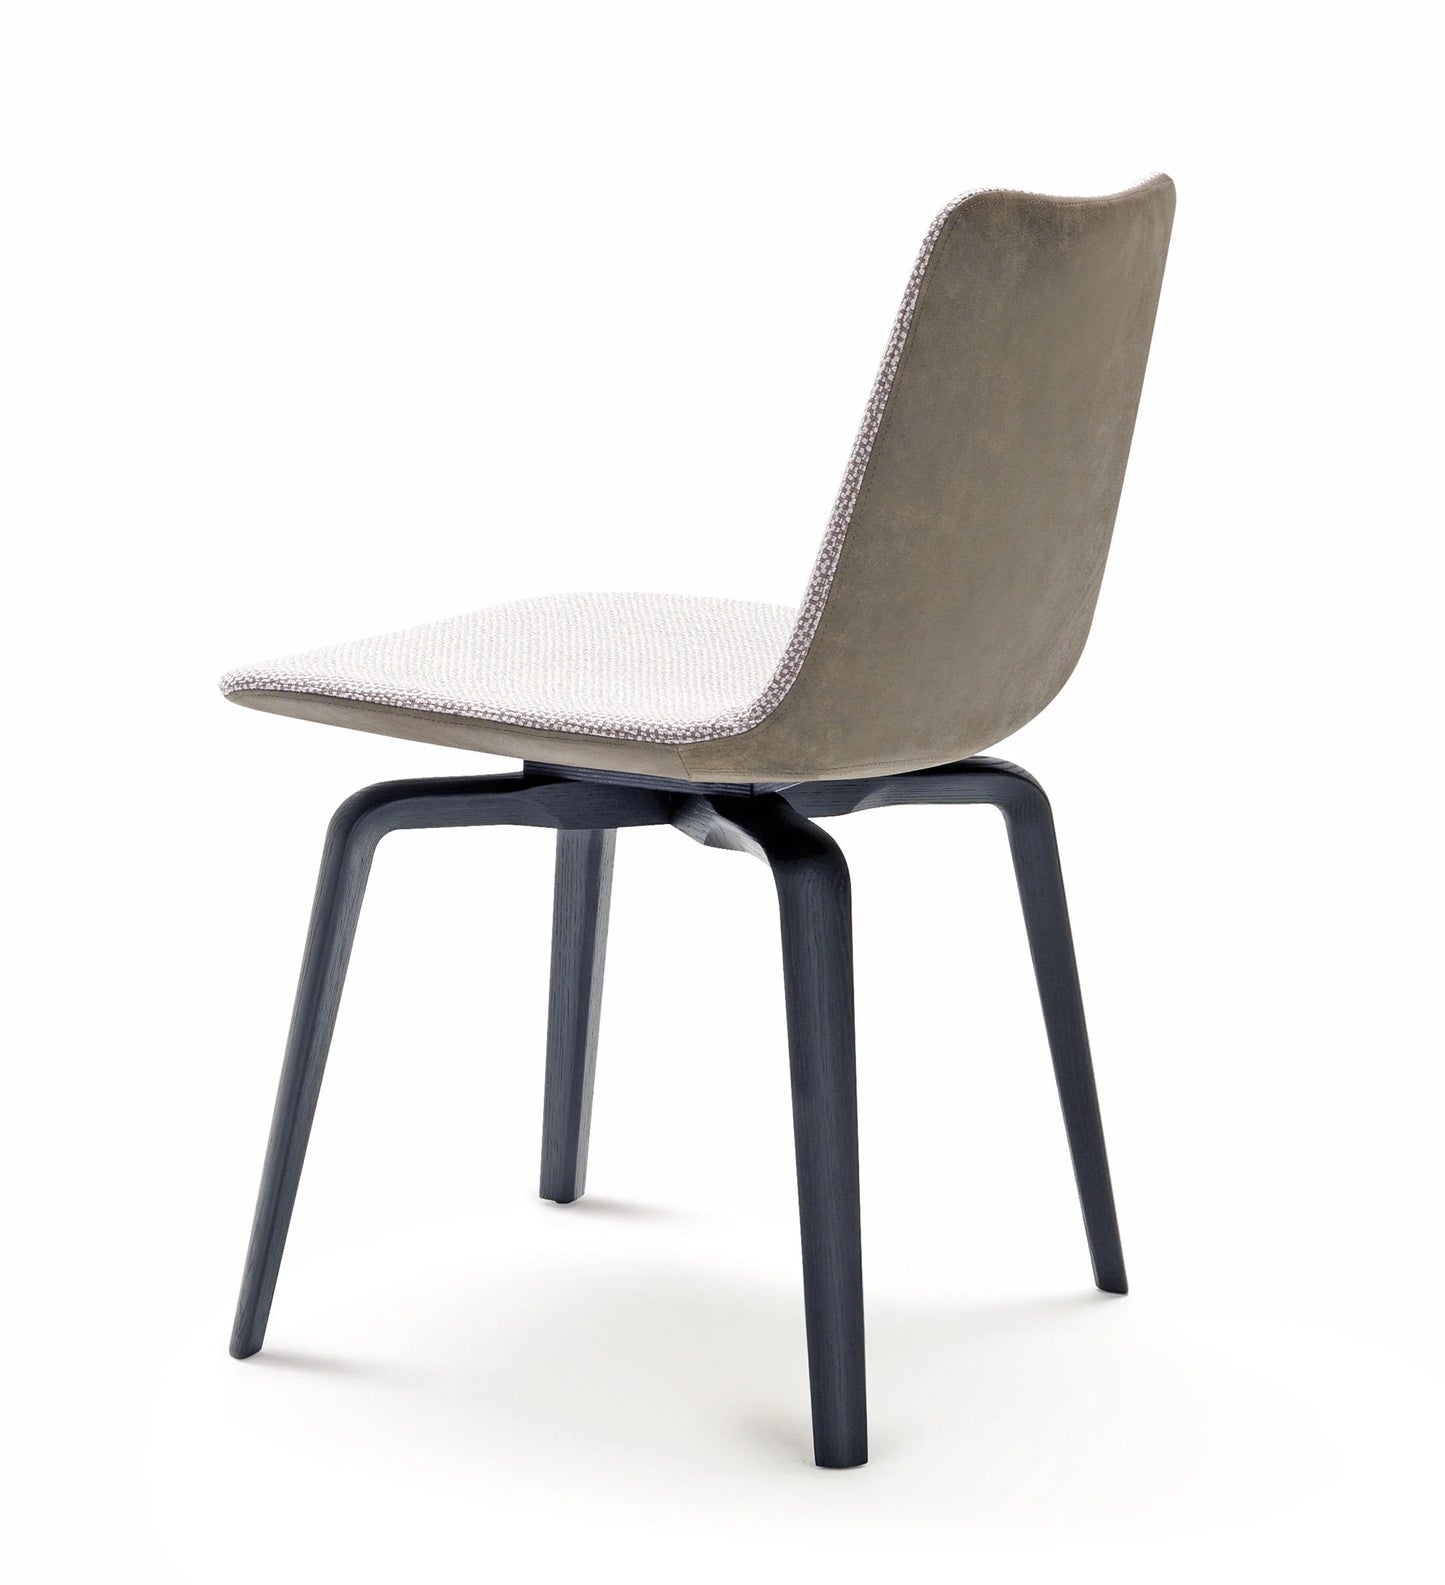 MICHELLE | Dining chair by MisuraEmme